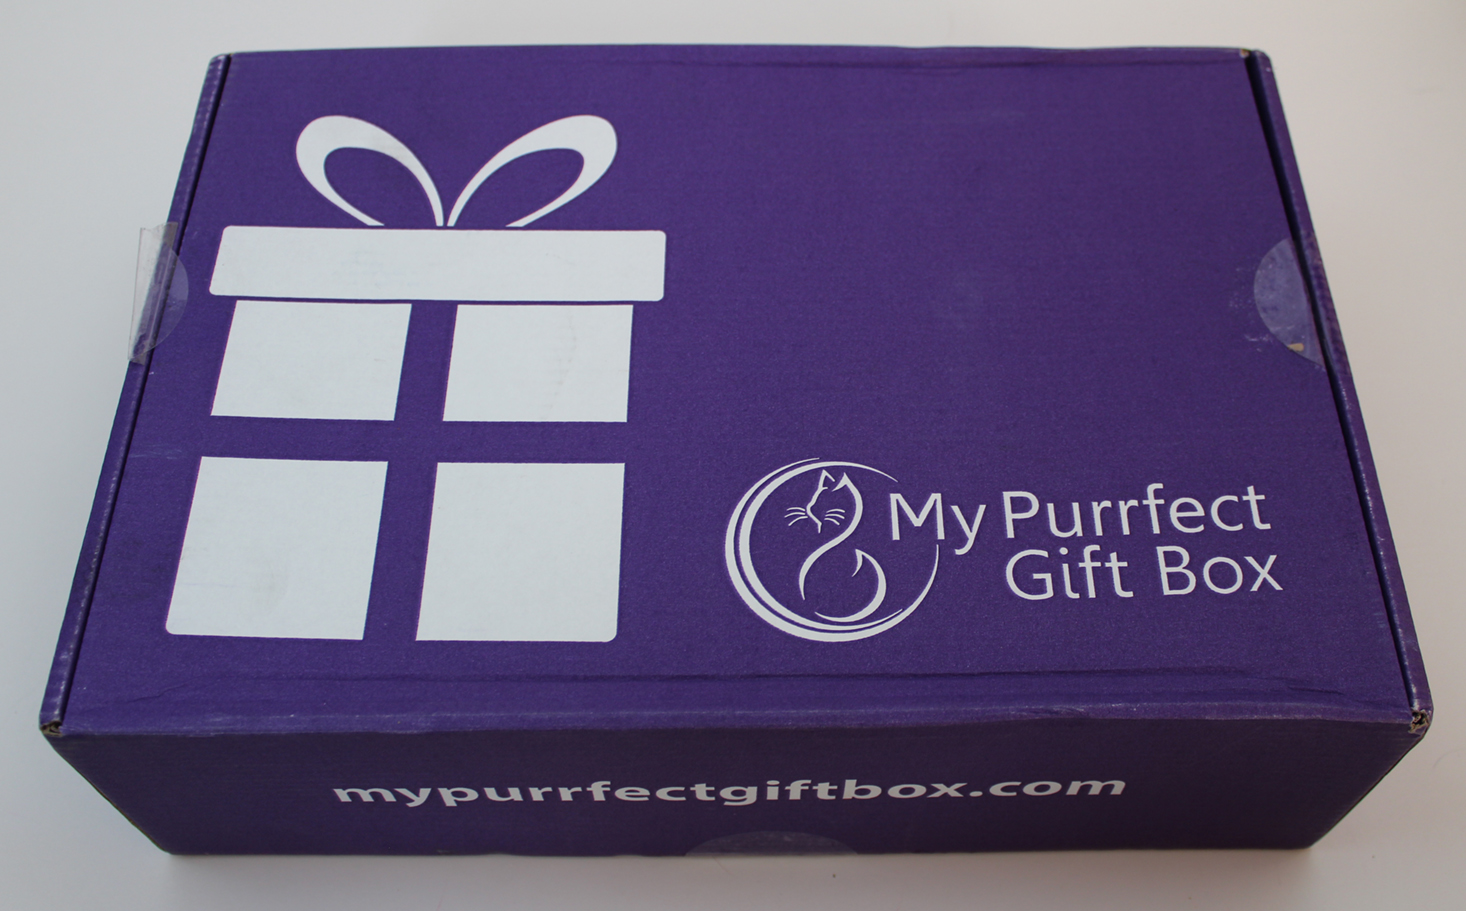 My Purrfect Gift Box Review + Coupon – December 2016